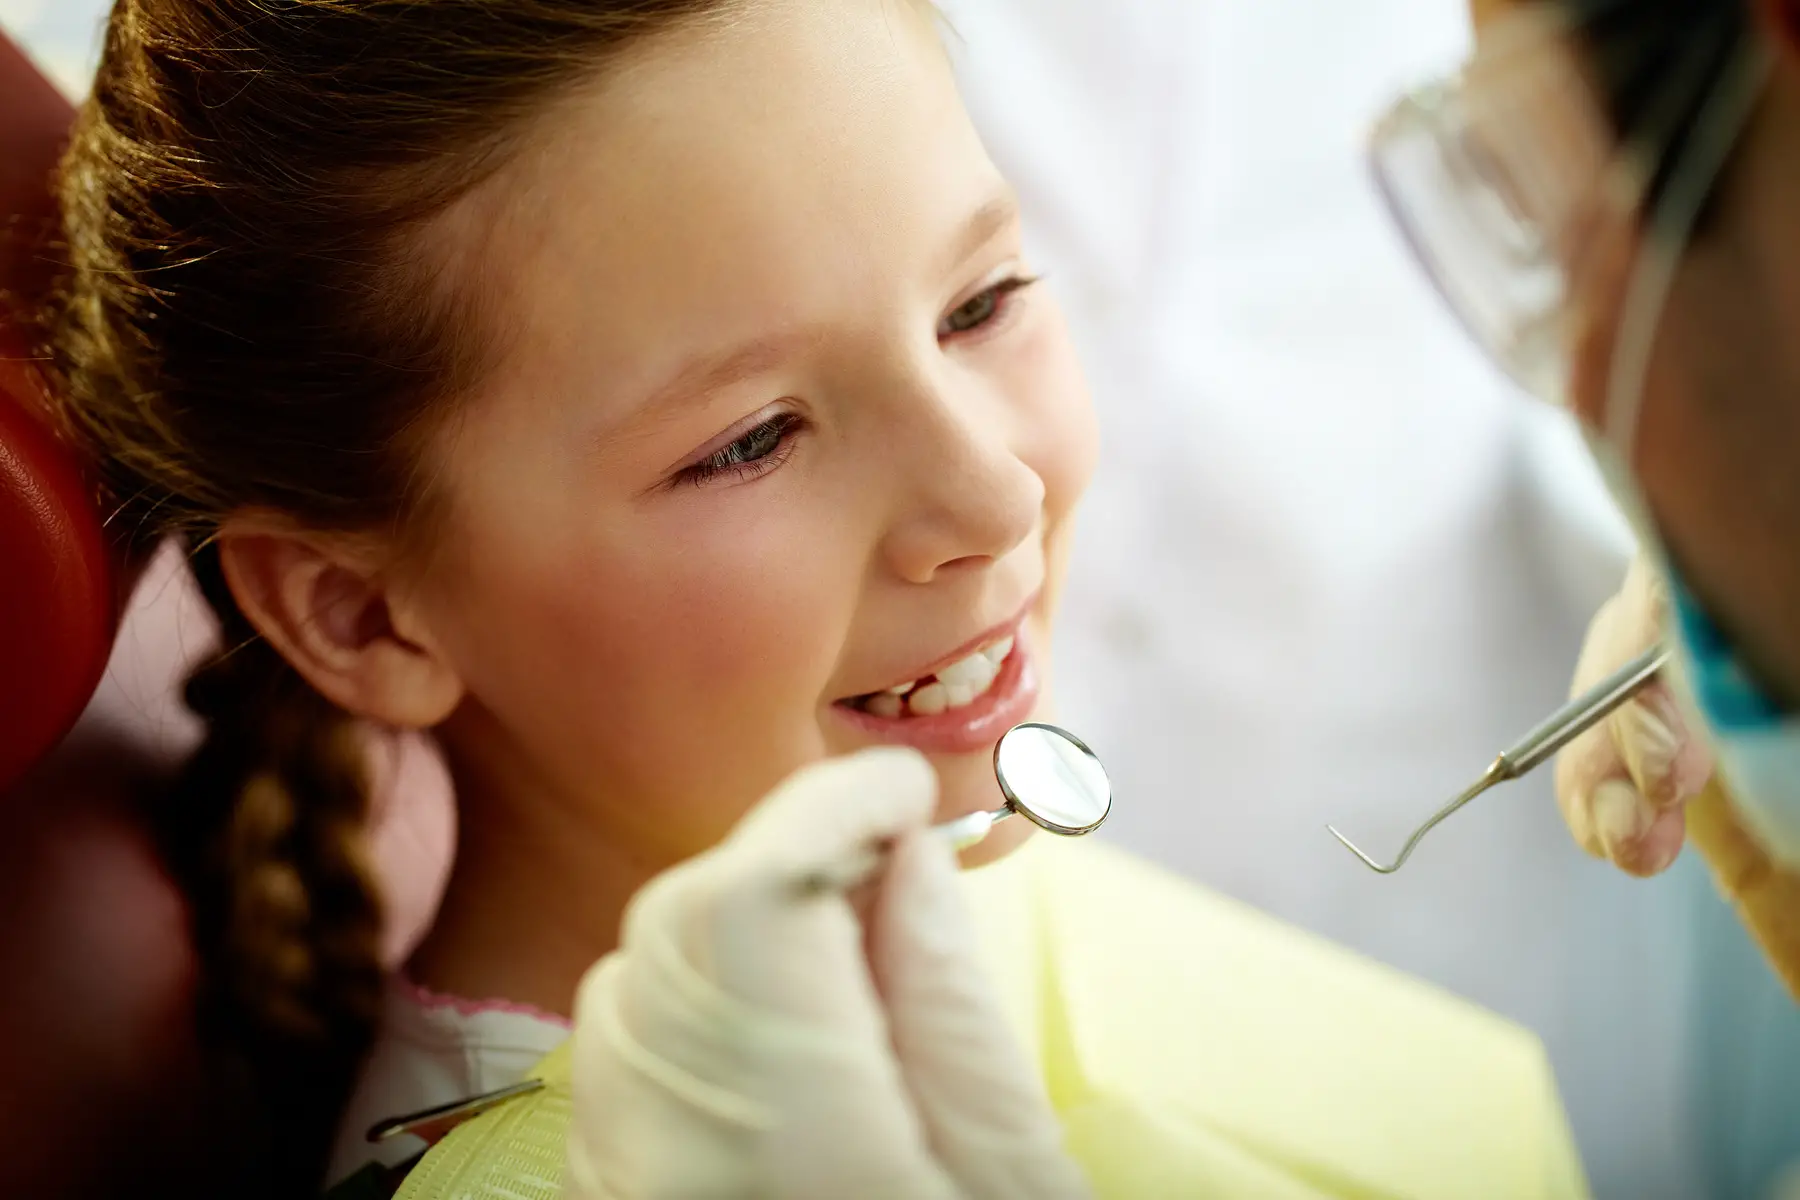 Young girl receiving dental treatment